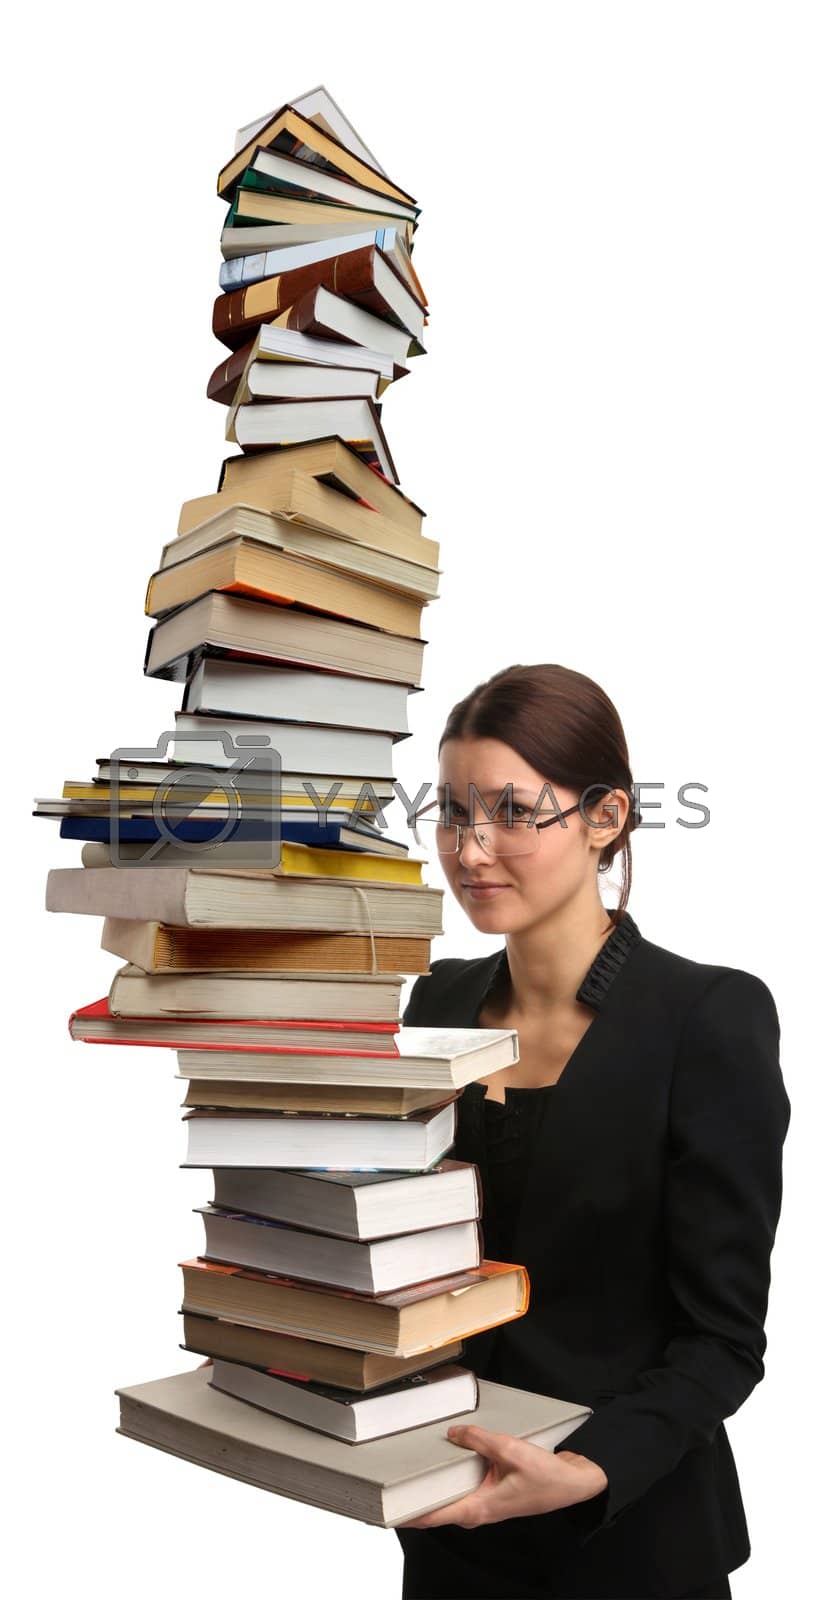 Royalty free image of girl holding a very large pile of books by skutin